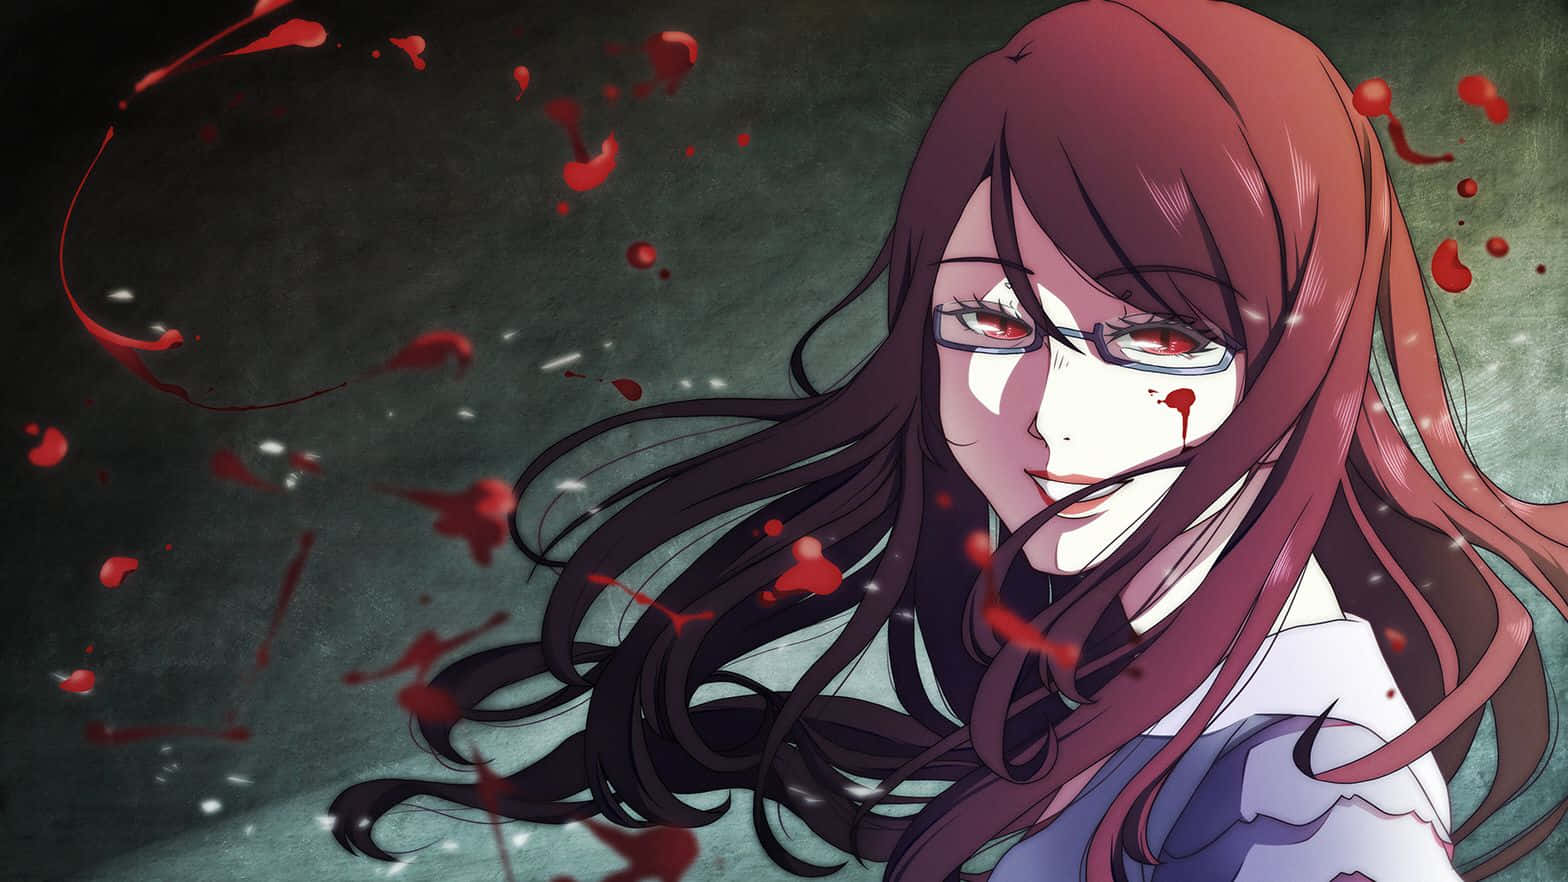 Rize Kamishiro Exuding charm and style, Tokyo Ghoul's Rize Kamishiro Wallpaper